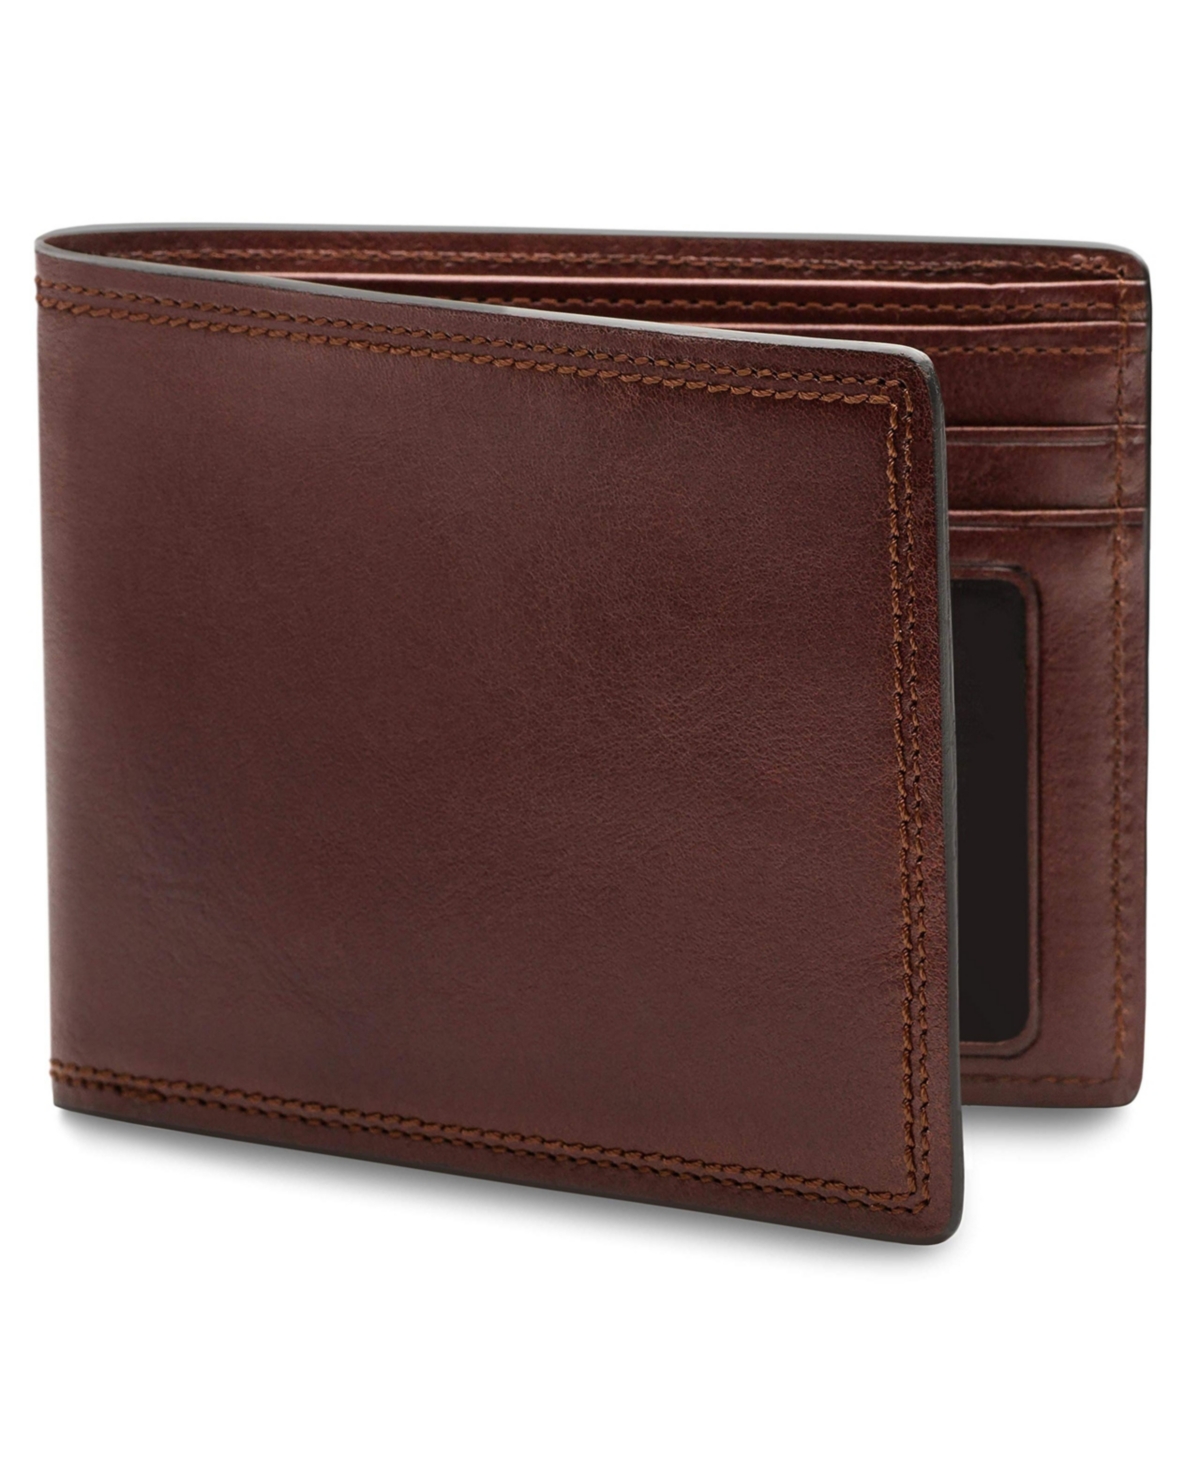 Men's Executive Wallet in Dolce Leather - Rfid - Dark brown